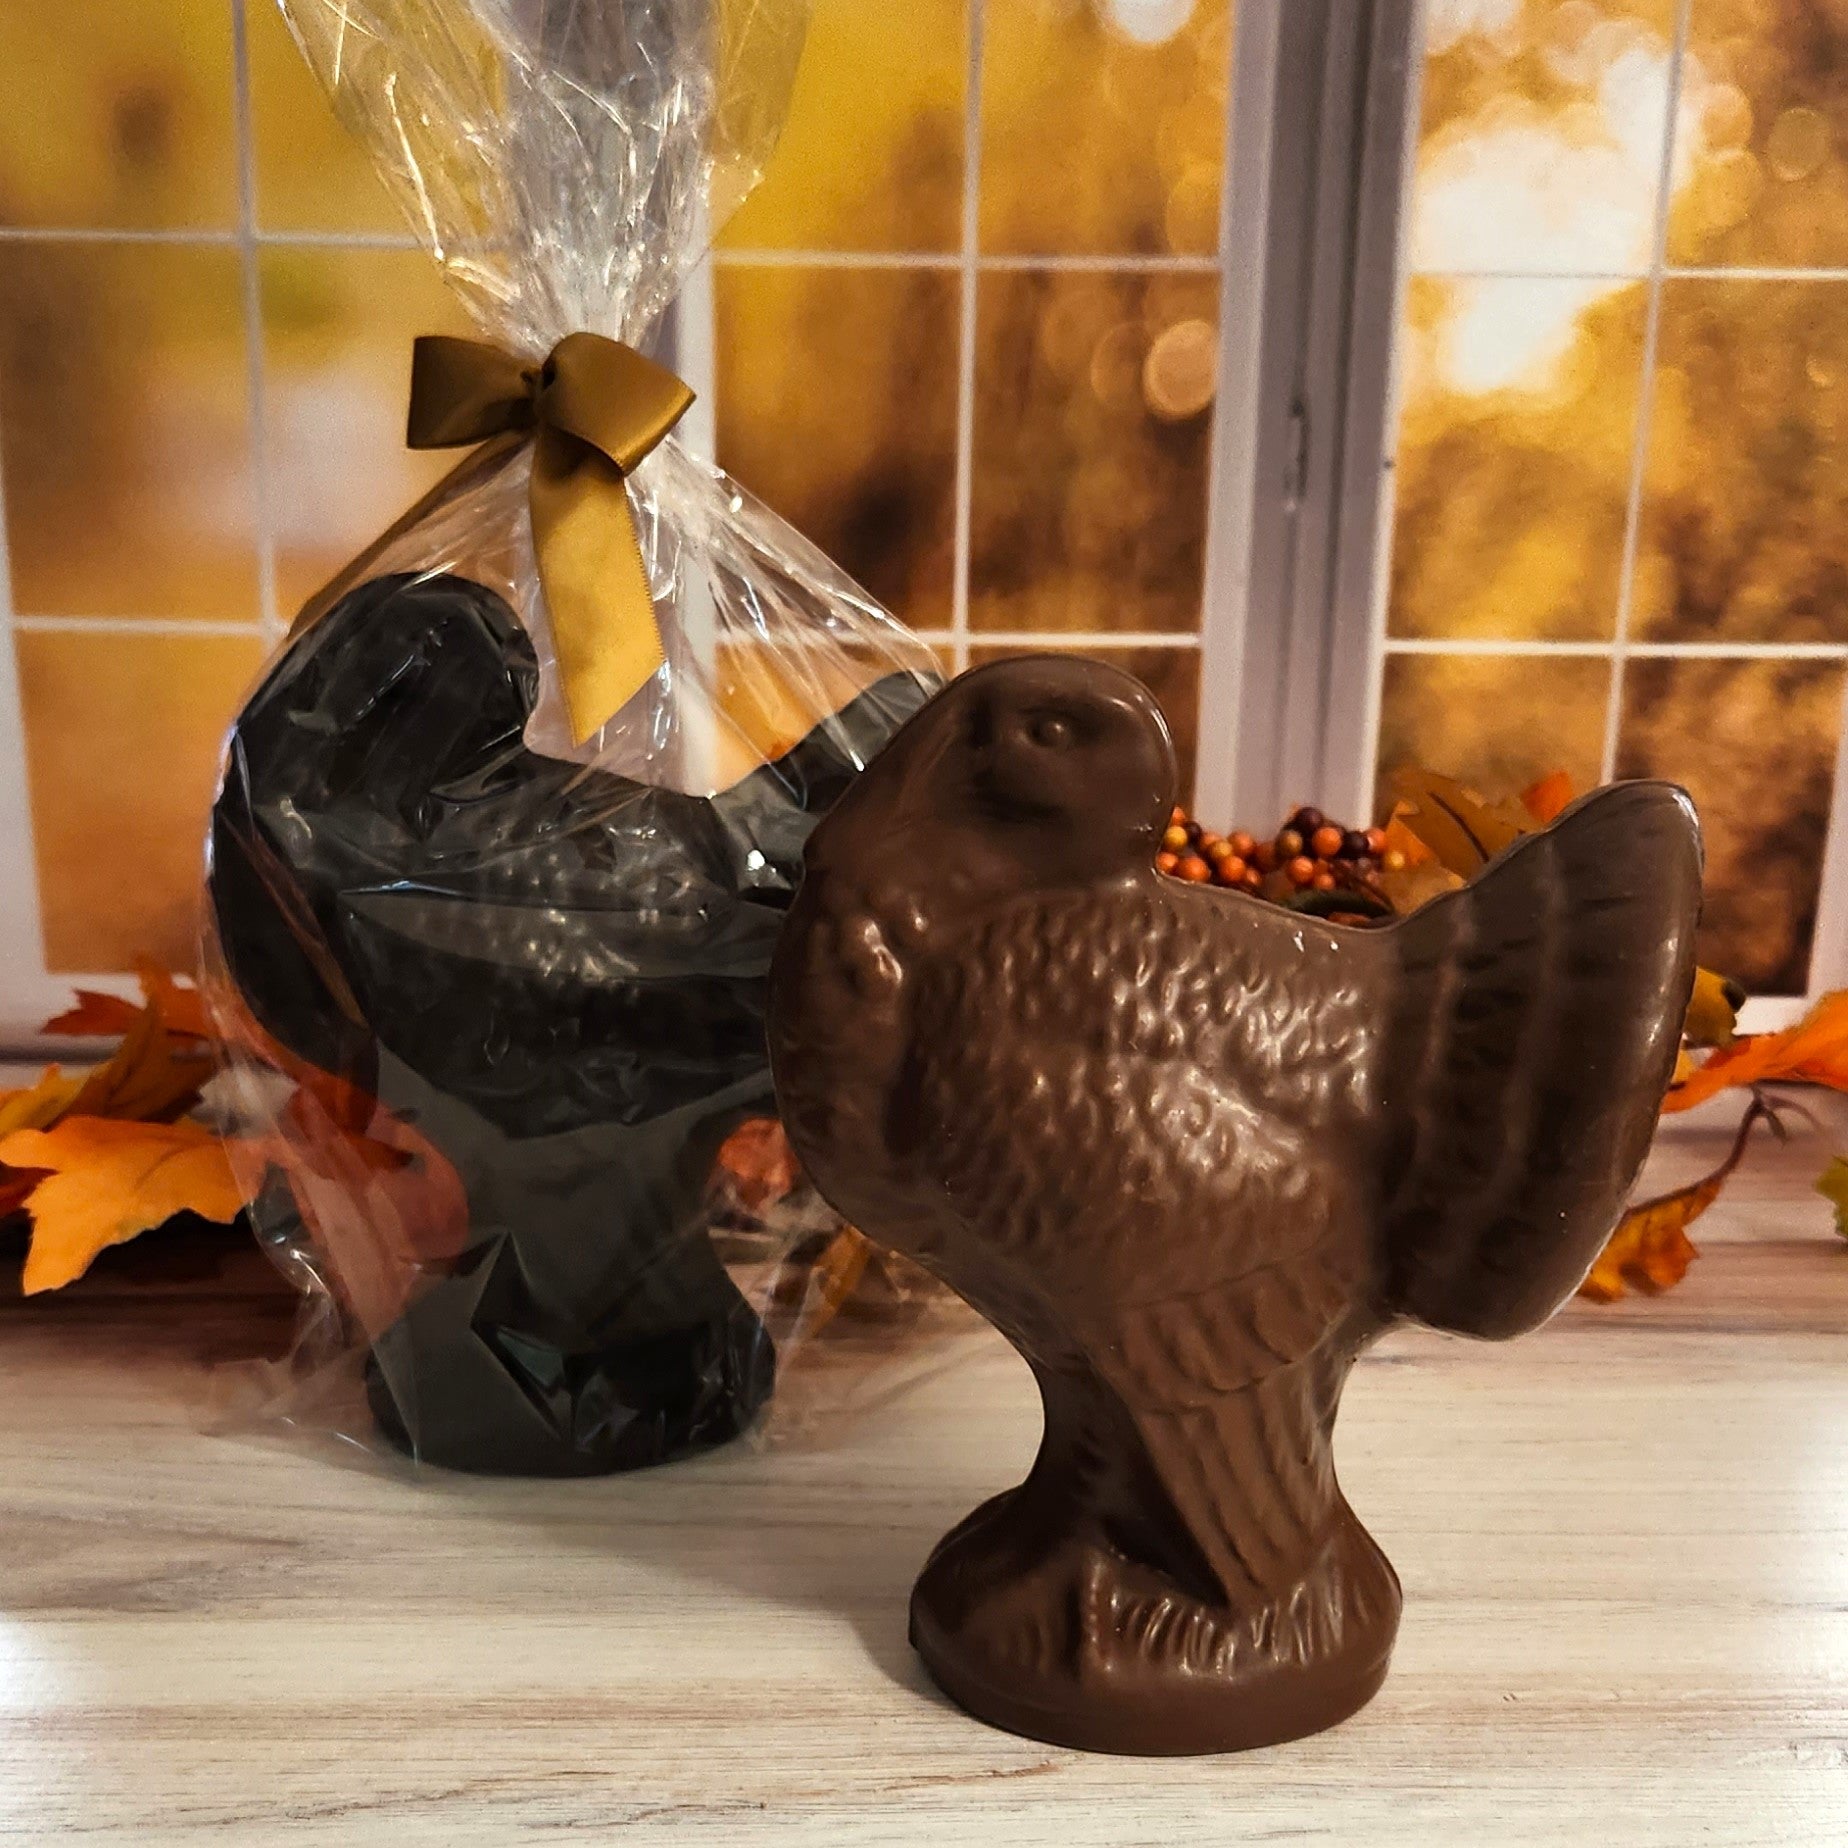 Handcrafted from smooth milk or dark chocolate, this one-pound semi-solid turkey-shaped treat is irresistibly delicious and perfect for the holiday season.